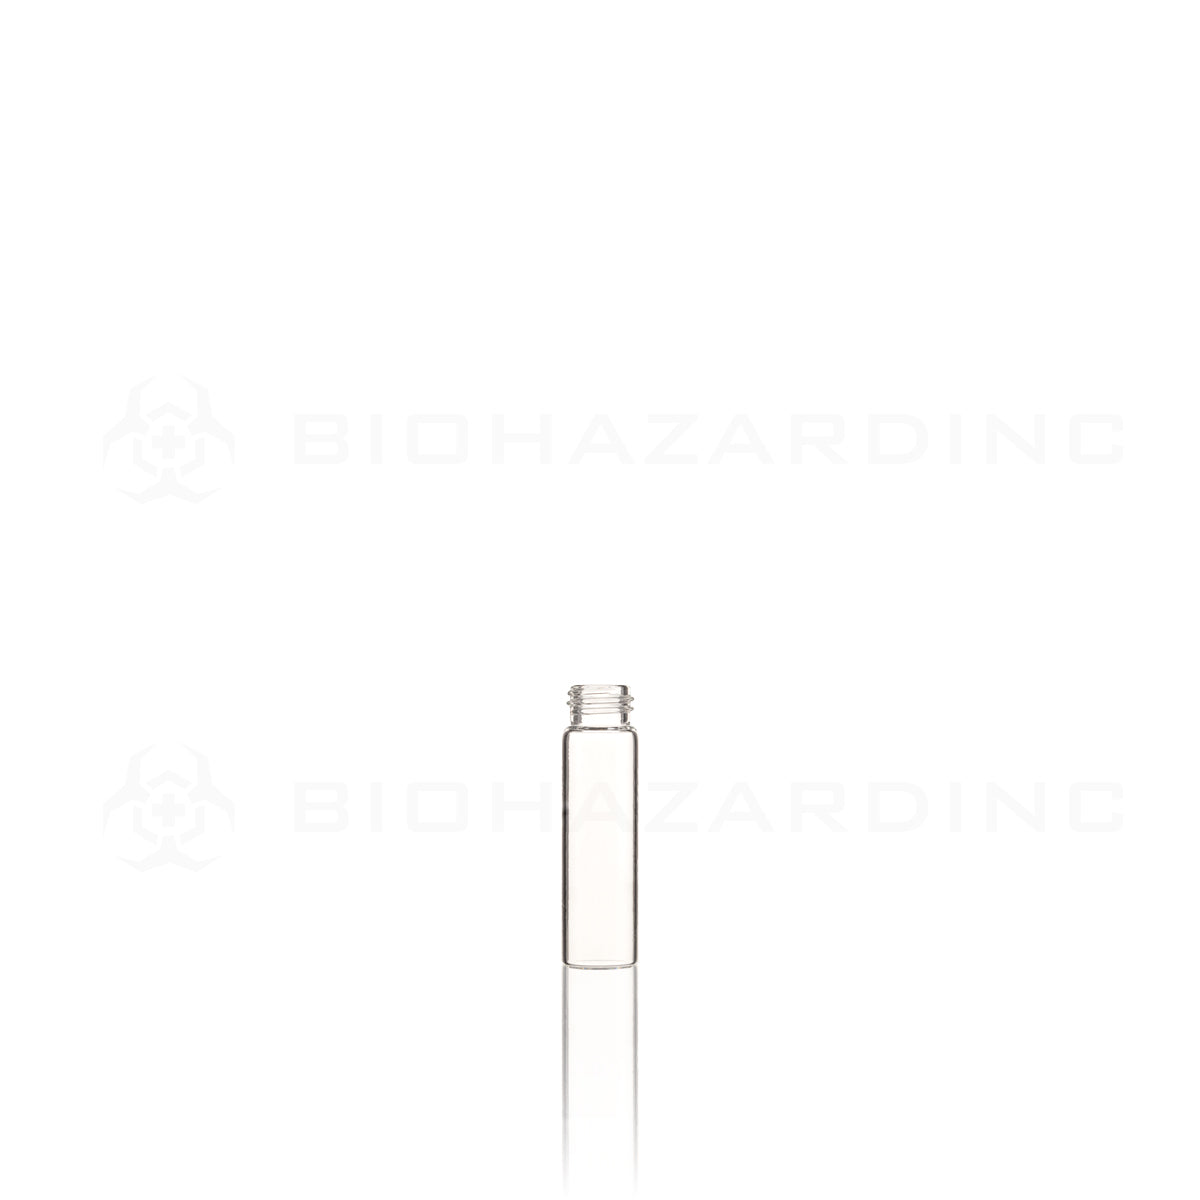 Glass Vial | Glass Vial 60mm Clear | 15mm - 2 DR - 371 Count Glass Vial Biohazard Inc   